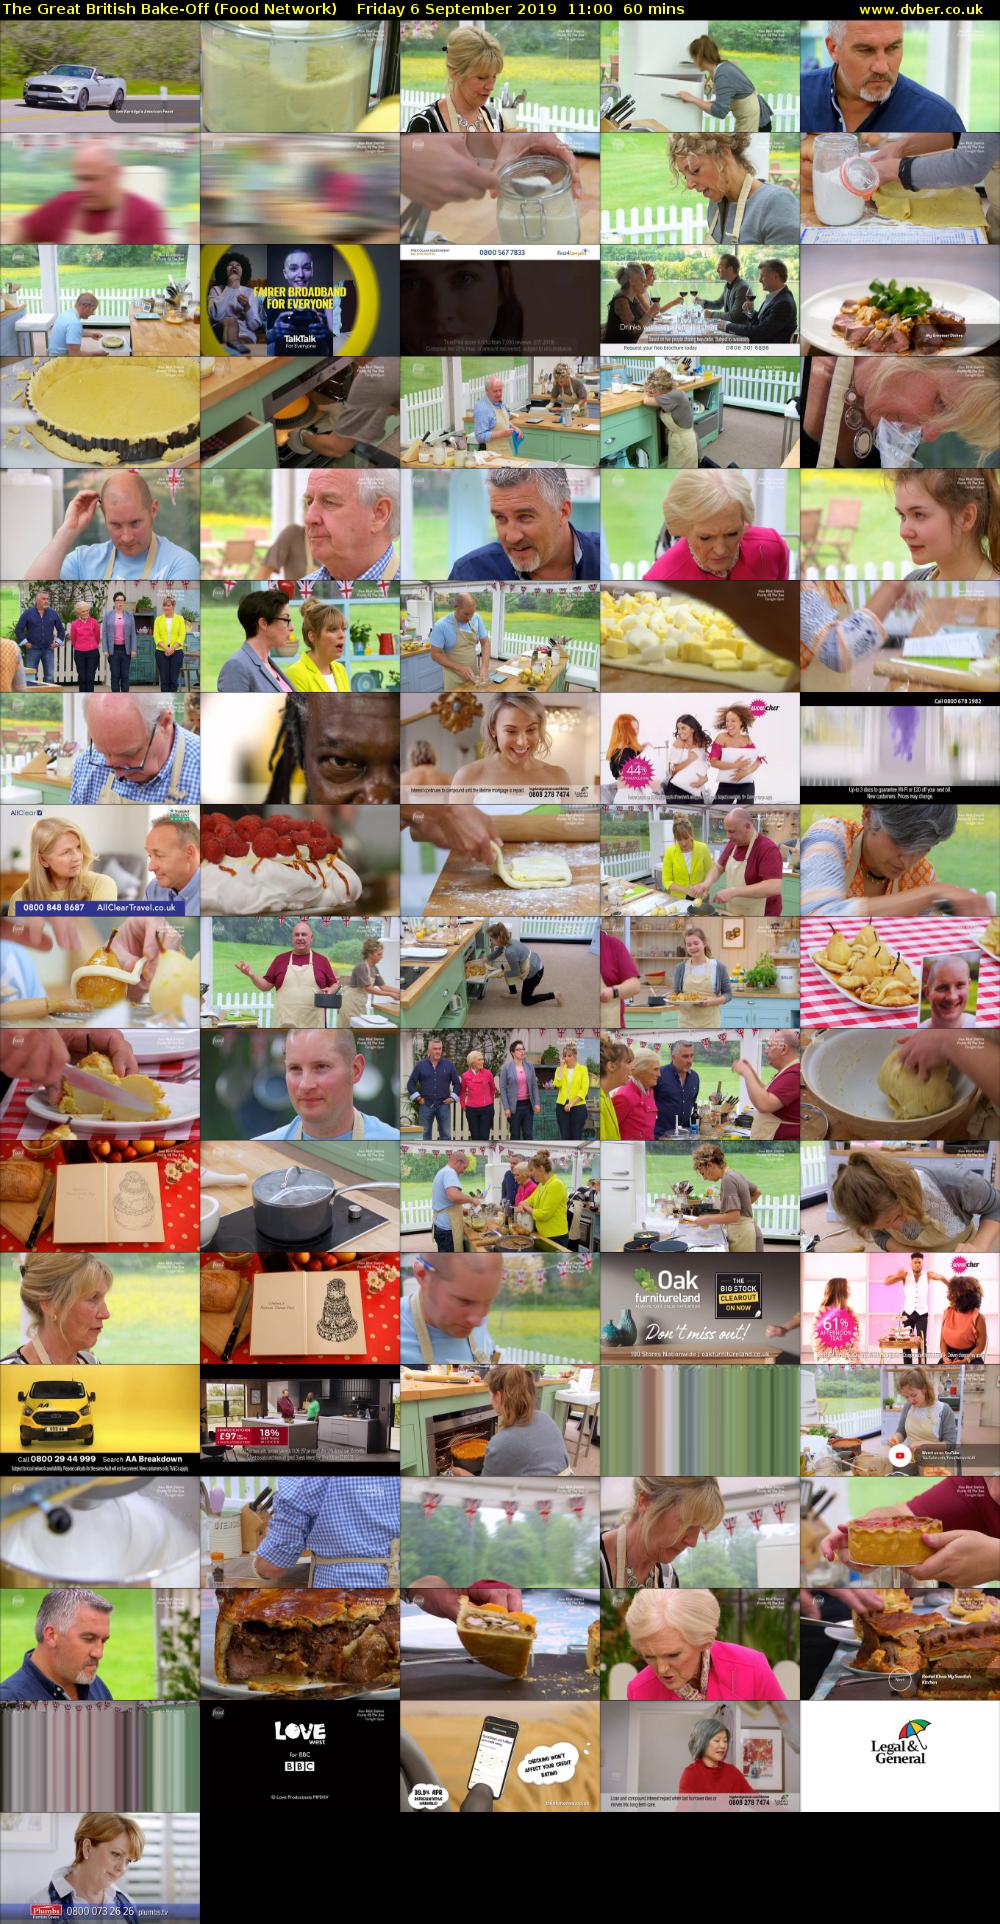 The Great British Bake-Off (Food Network) Friday 6 September 2019 11:00 - 12:00